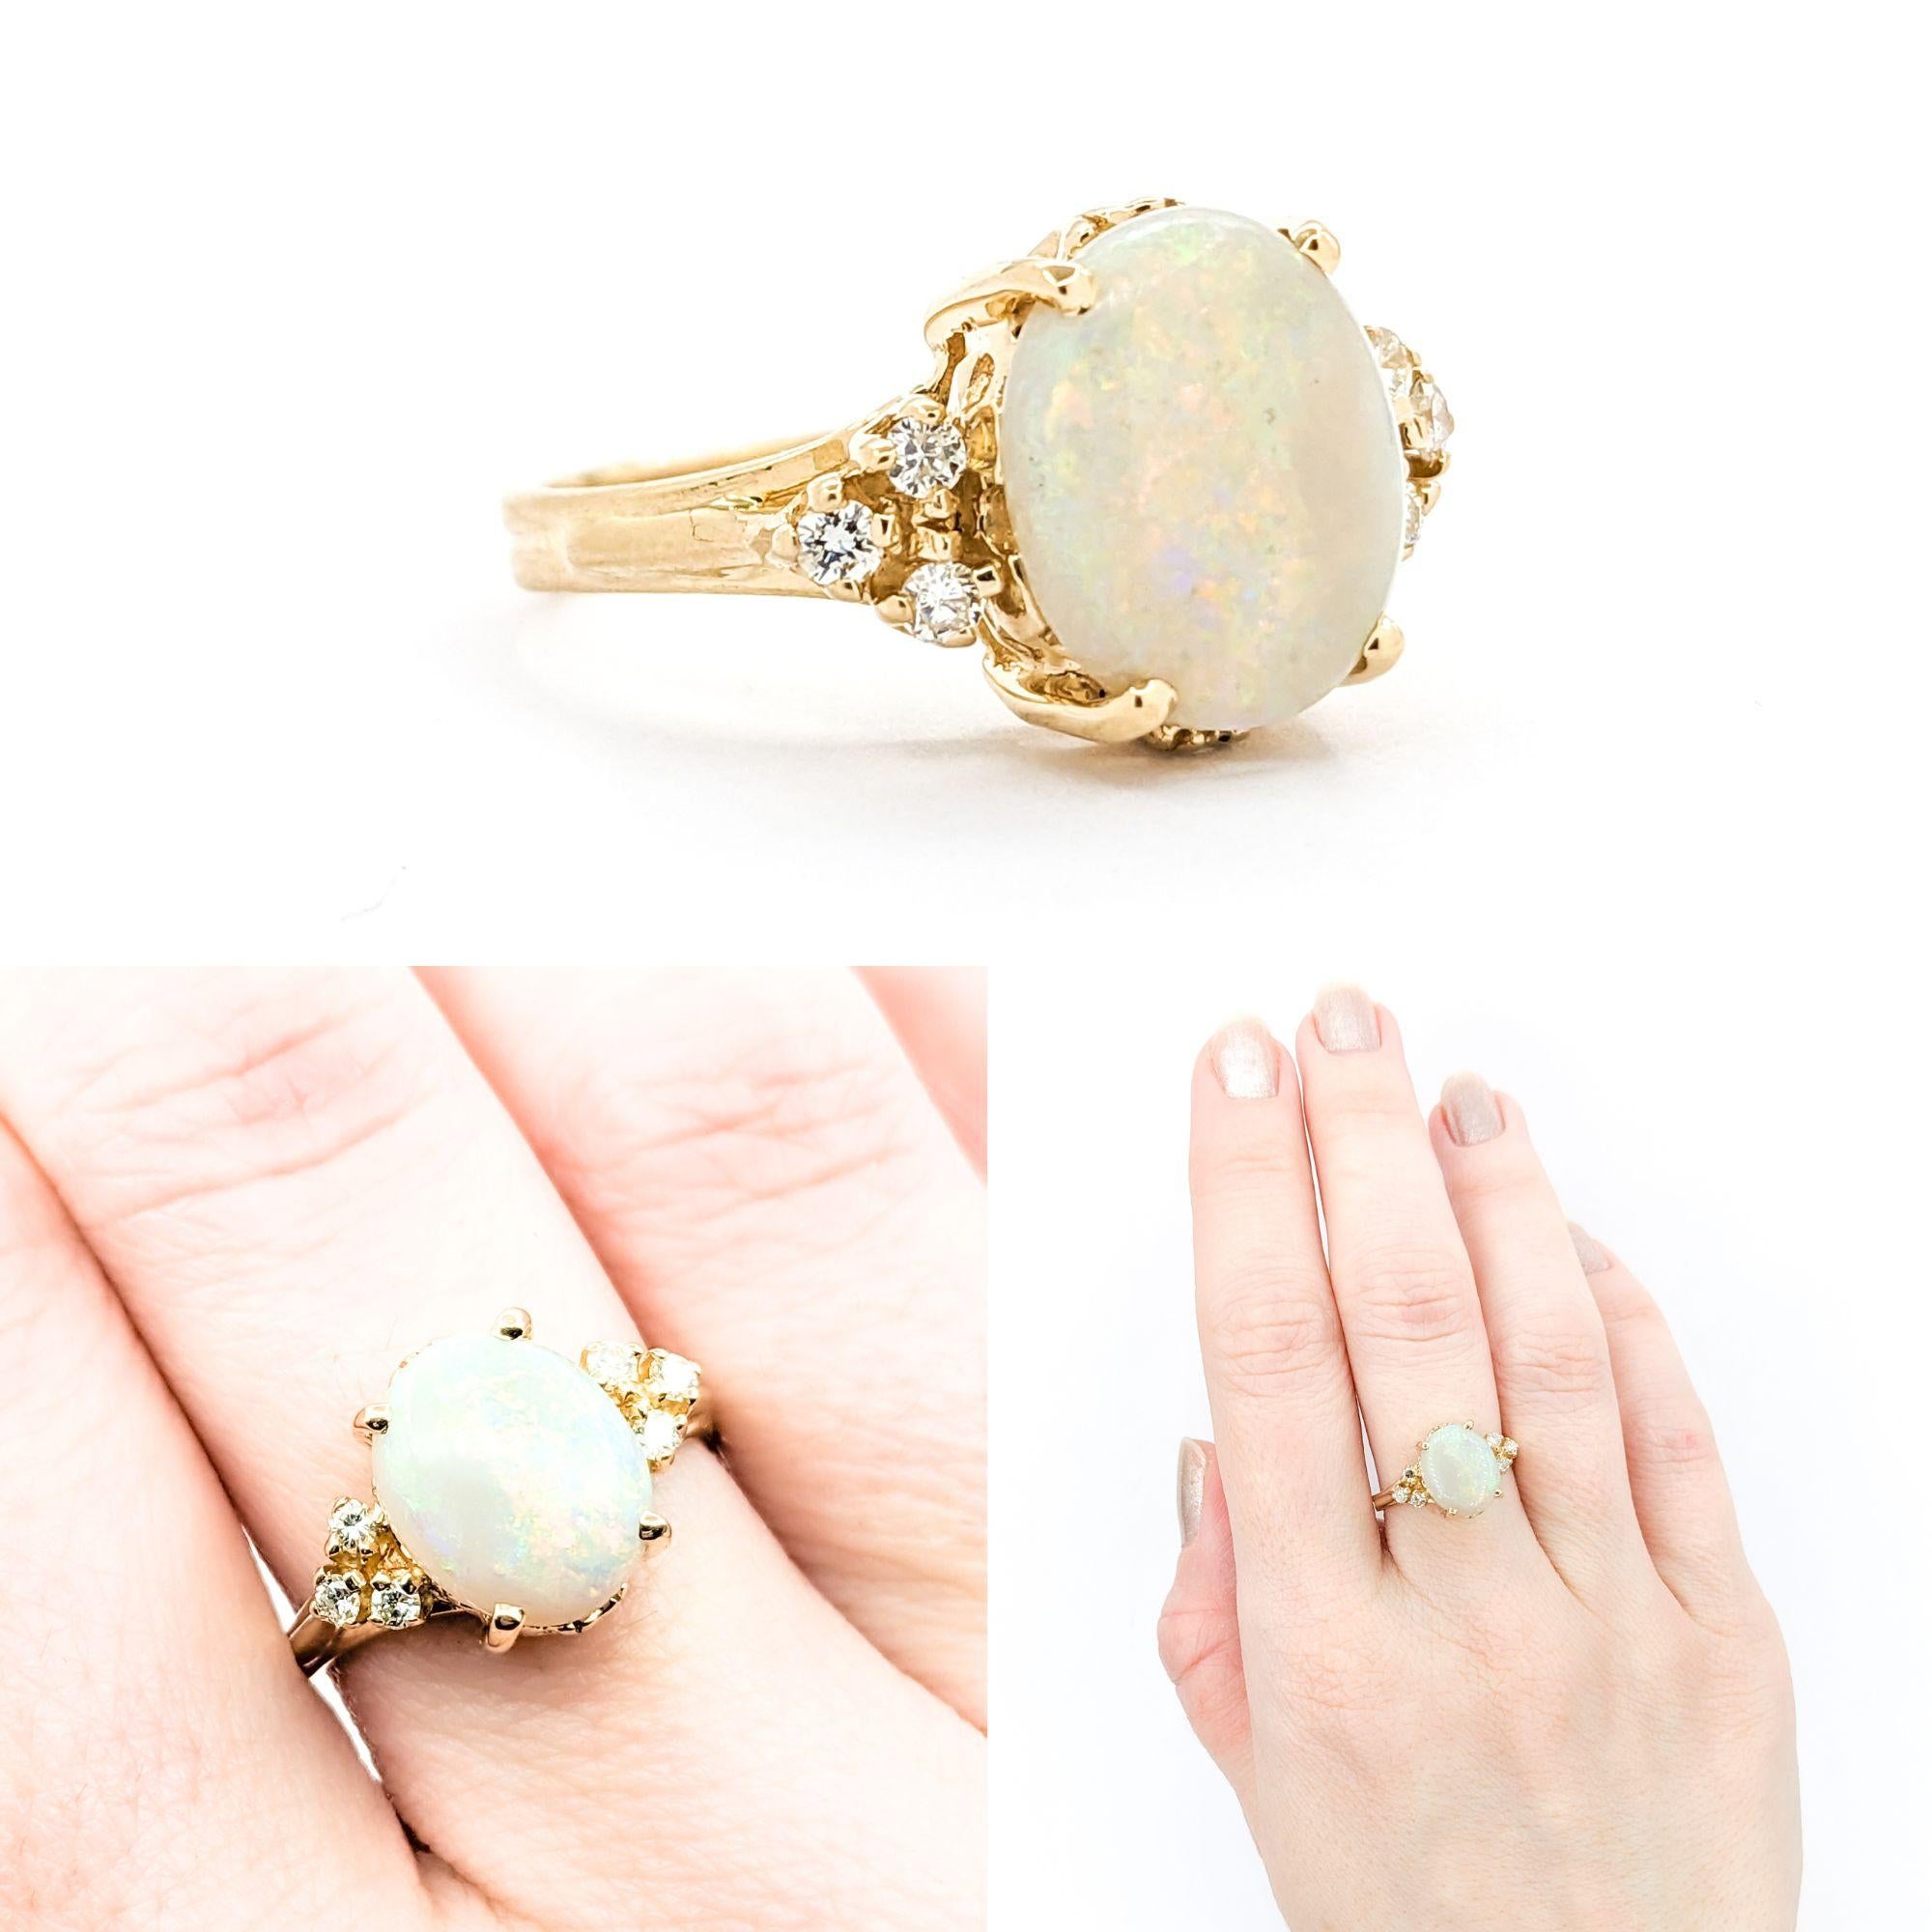 GIA Vintage Australian Opal & Diamond Ring in Yellow Gold

Introducing this beautiful Australian Opal Ring crafted in 14k Yellow Gold. The ring features a 2.27ct Australian Opal Centerpiece with .16ctw Round Diamonds in the form of glittering